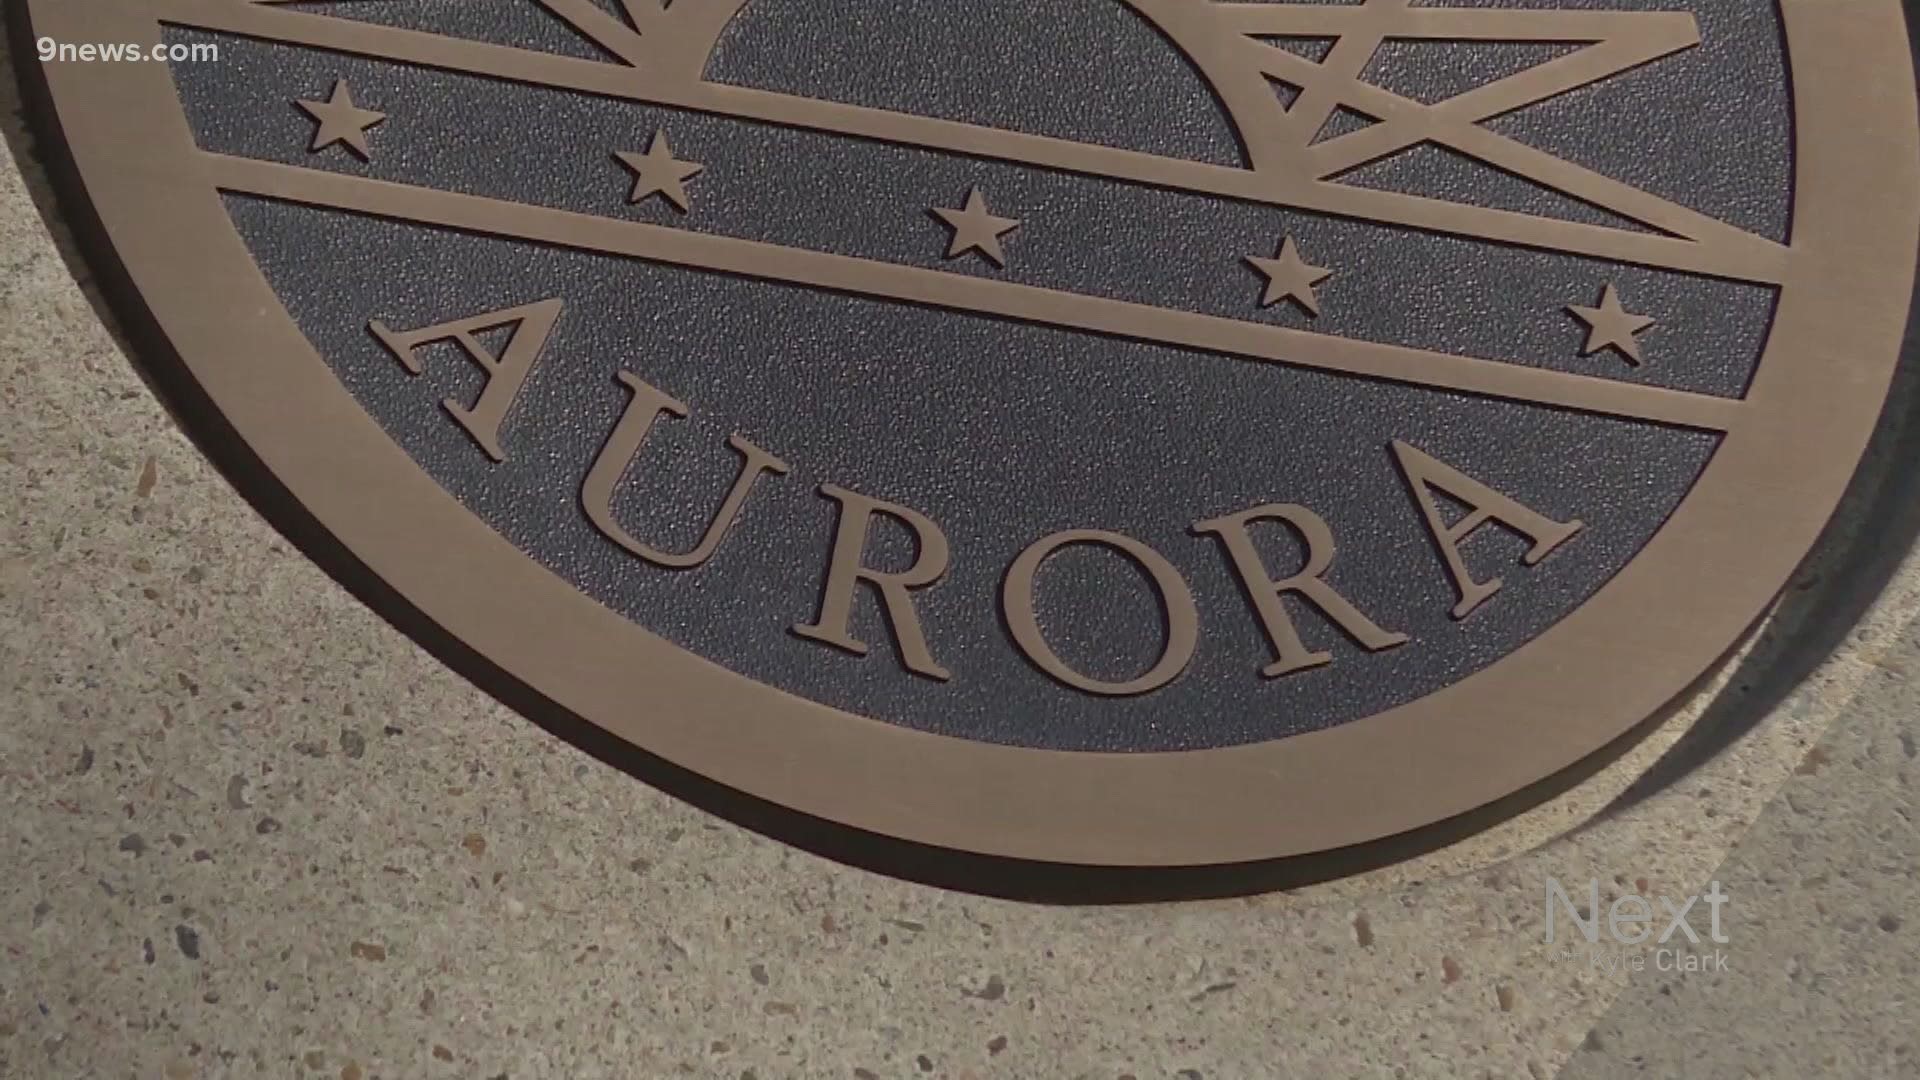 Depending on your viewpoint, Aurora City Council is taking on an issue that will mean more money for employees or cost more money for businesses.